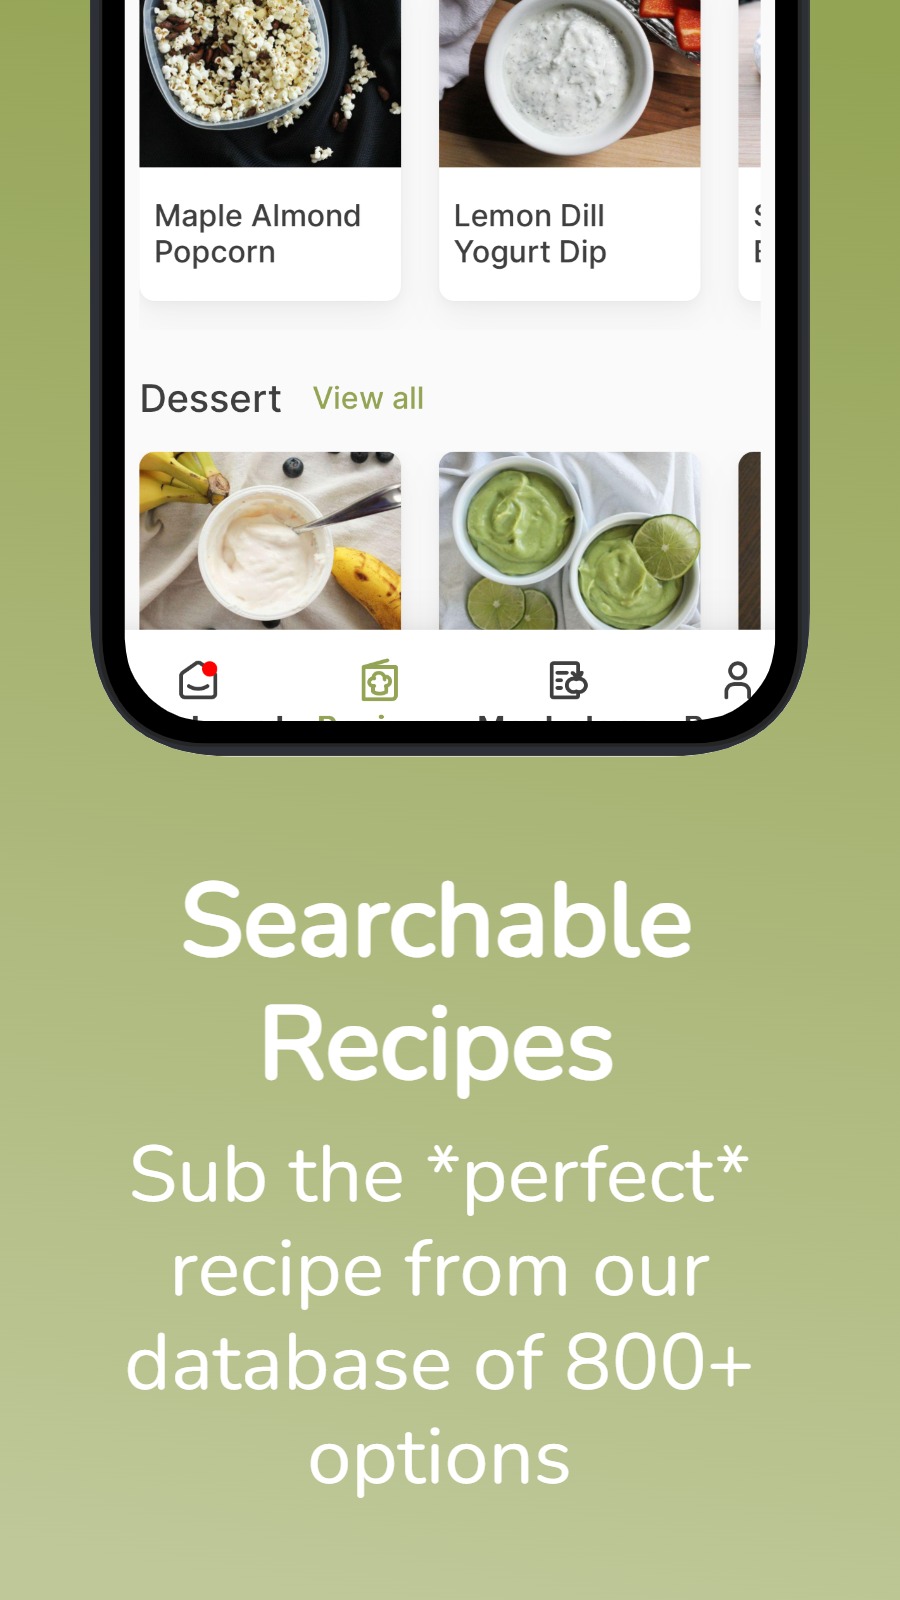 Searchable Recipes - Sub the *perfect* recipe from our database of 800+ options